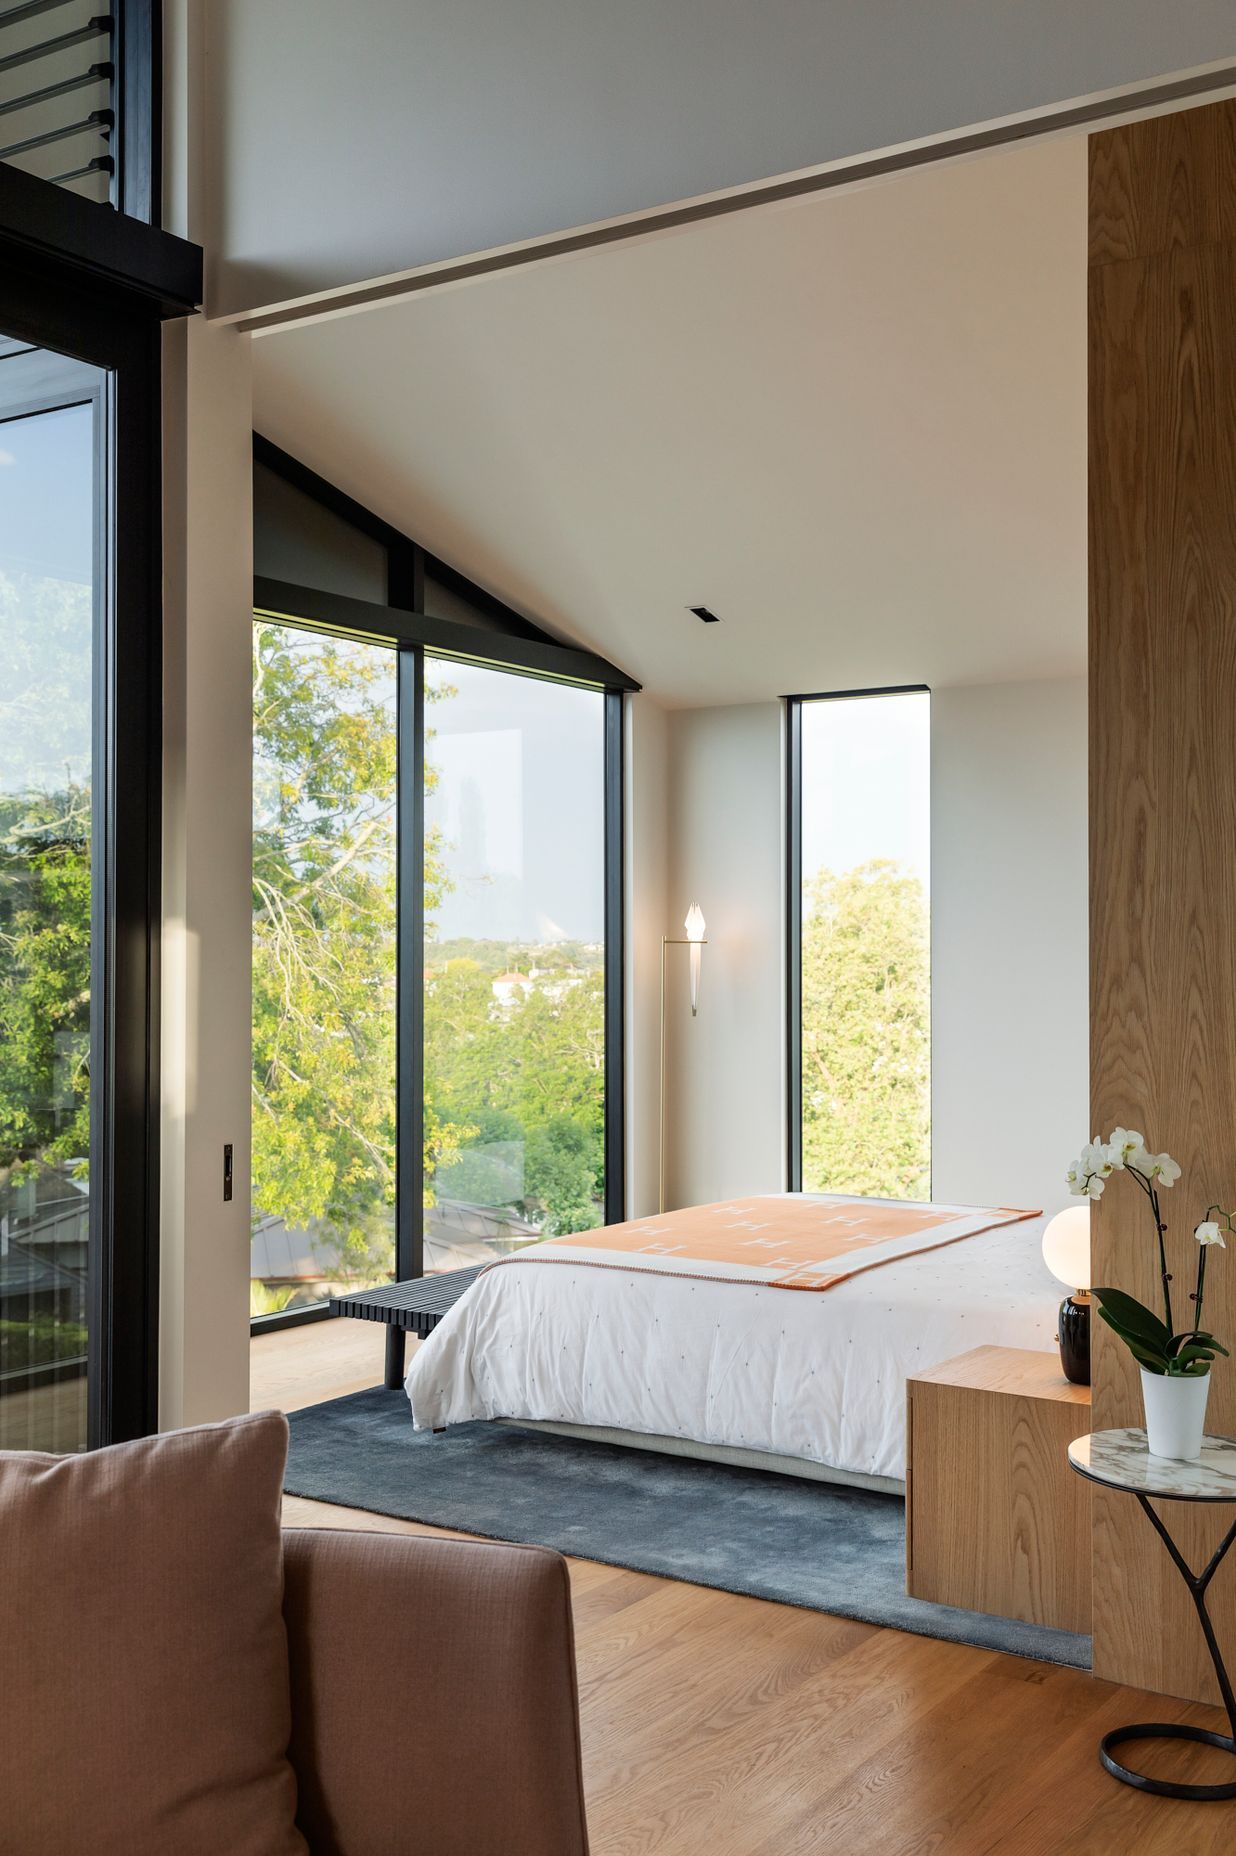 The upper-level study and master bedroom enjoys views of neighbouring treetops.